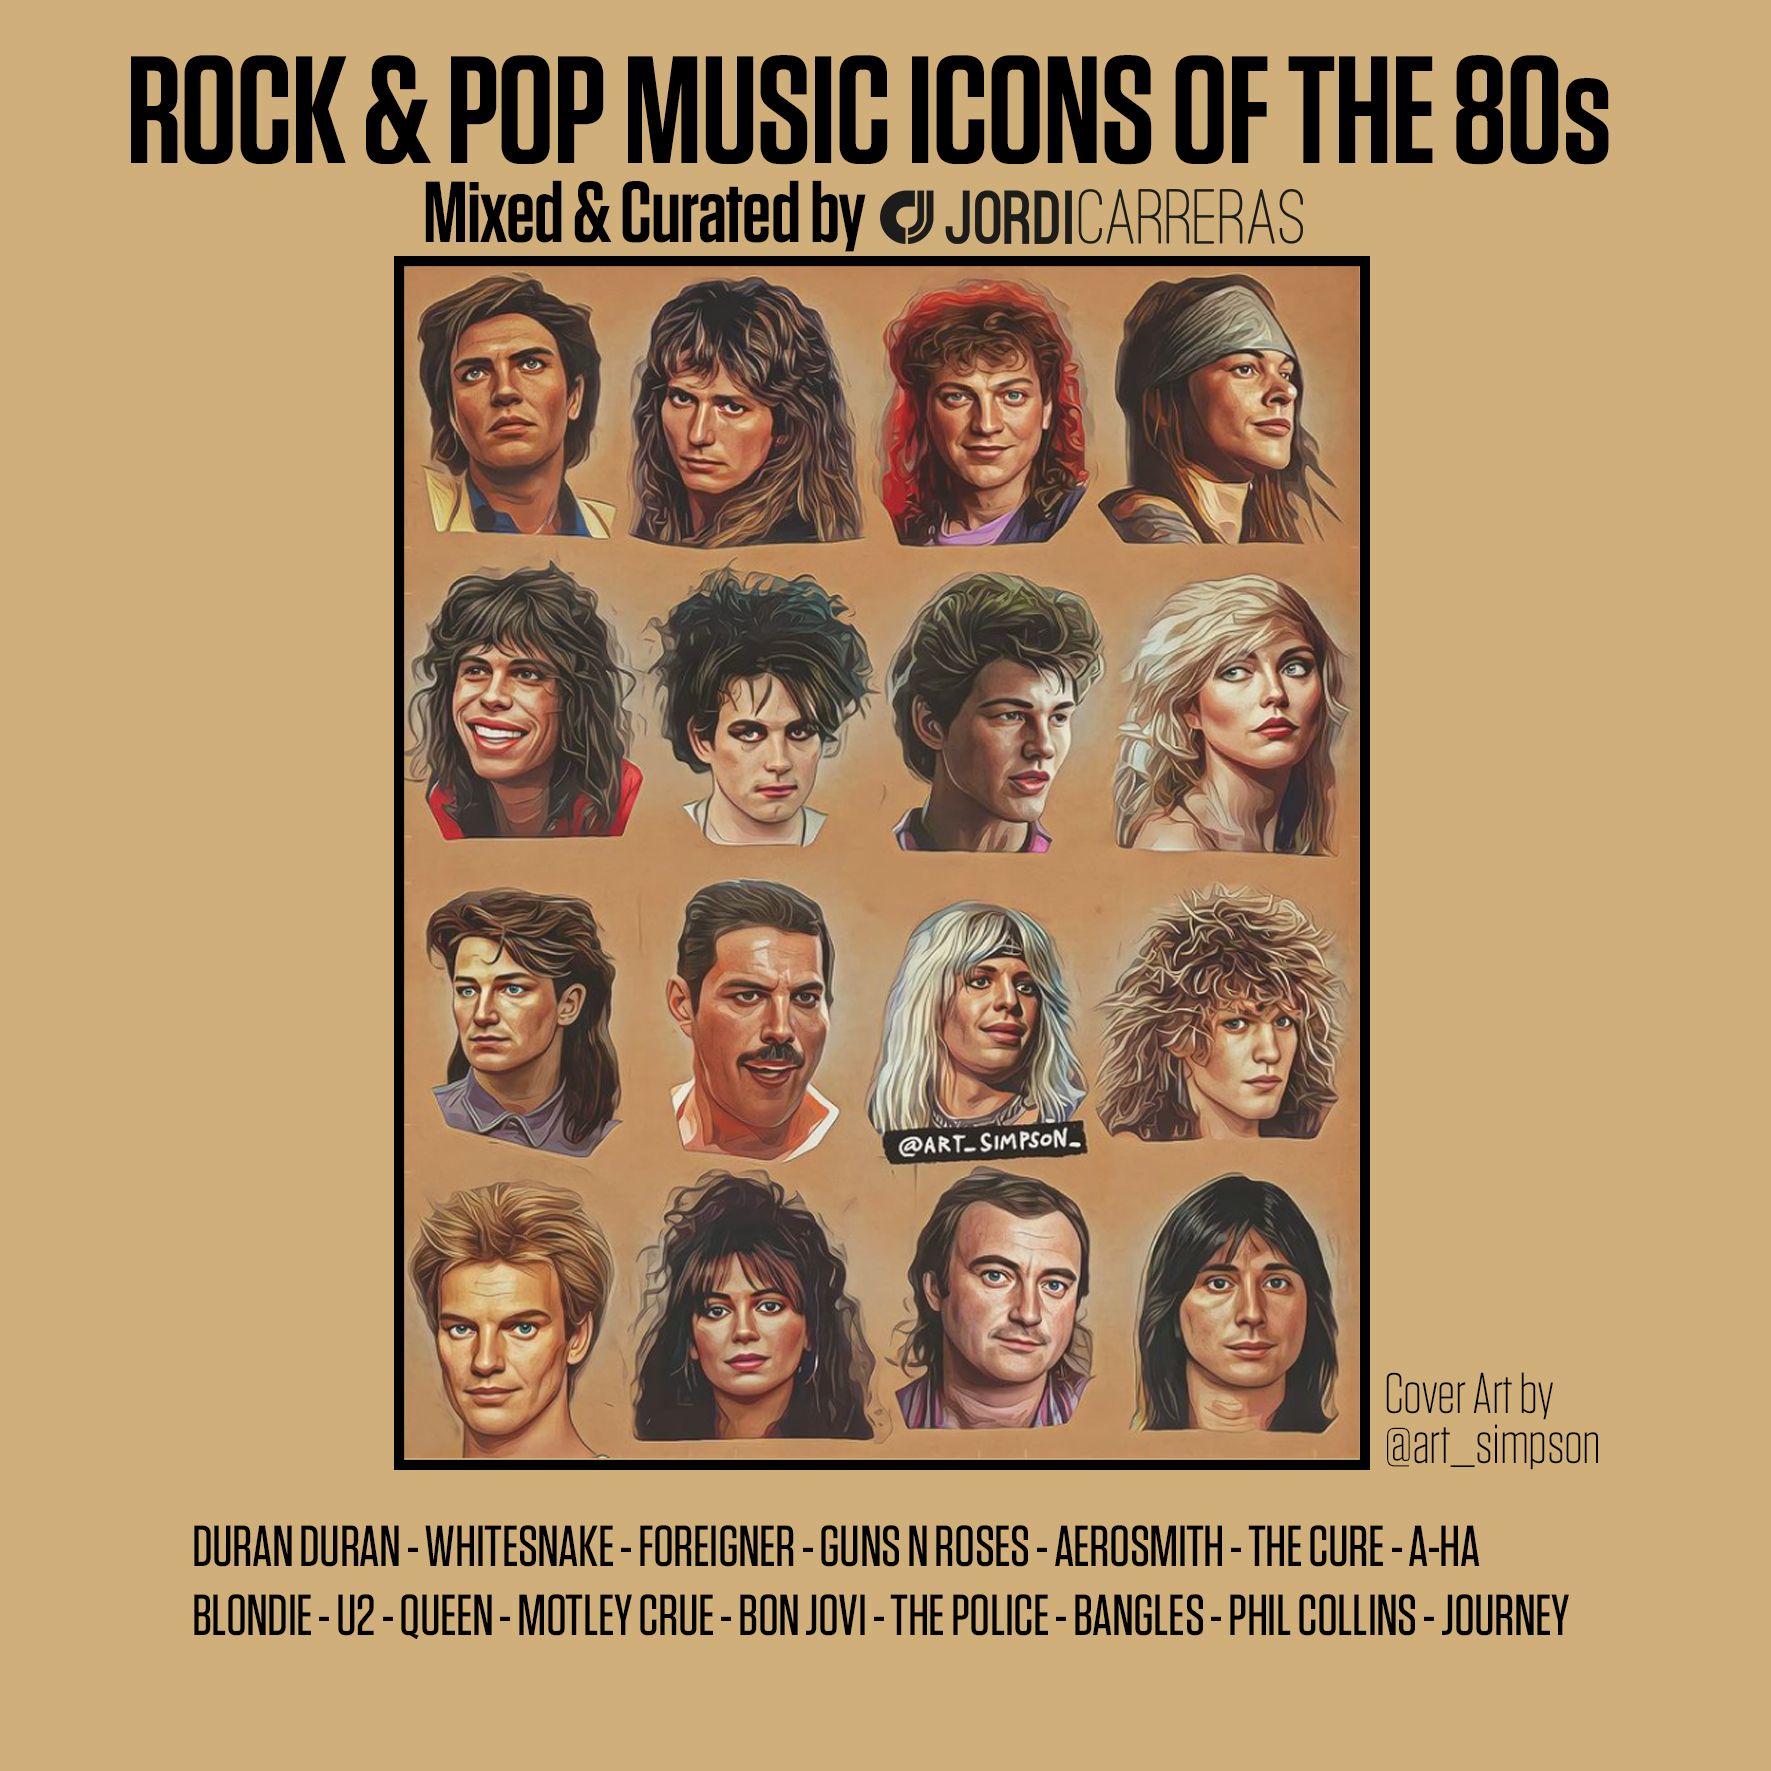 ROCK & POP MUSIC ICONS OF THE 80s - Mixed & Curated by Jordi Carreras